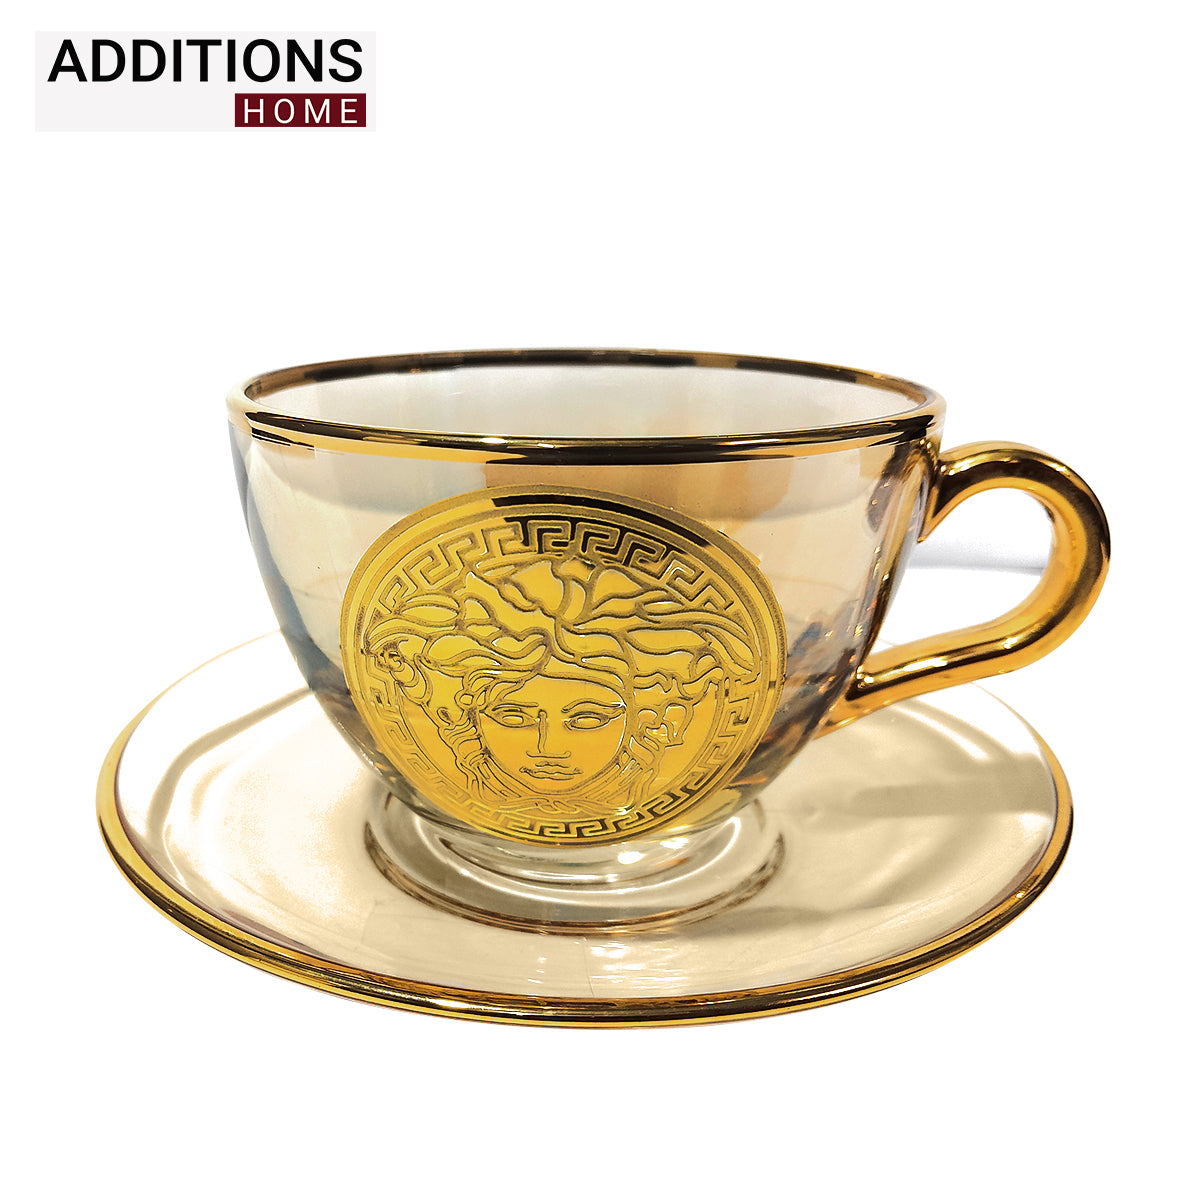 Elegant Cup and Plate MADE IN TURKEY, AMBER COLOUR, GOLD PLATED Set of 6 (limited edition)